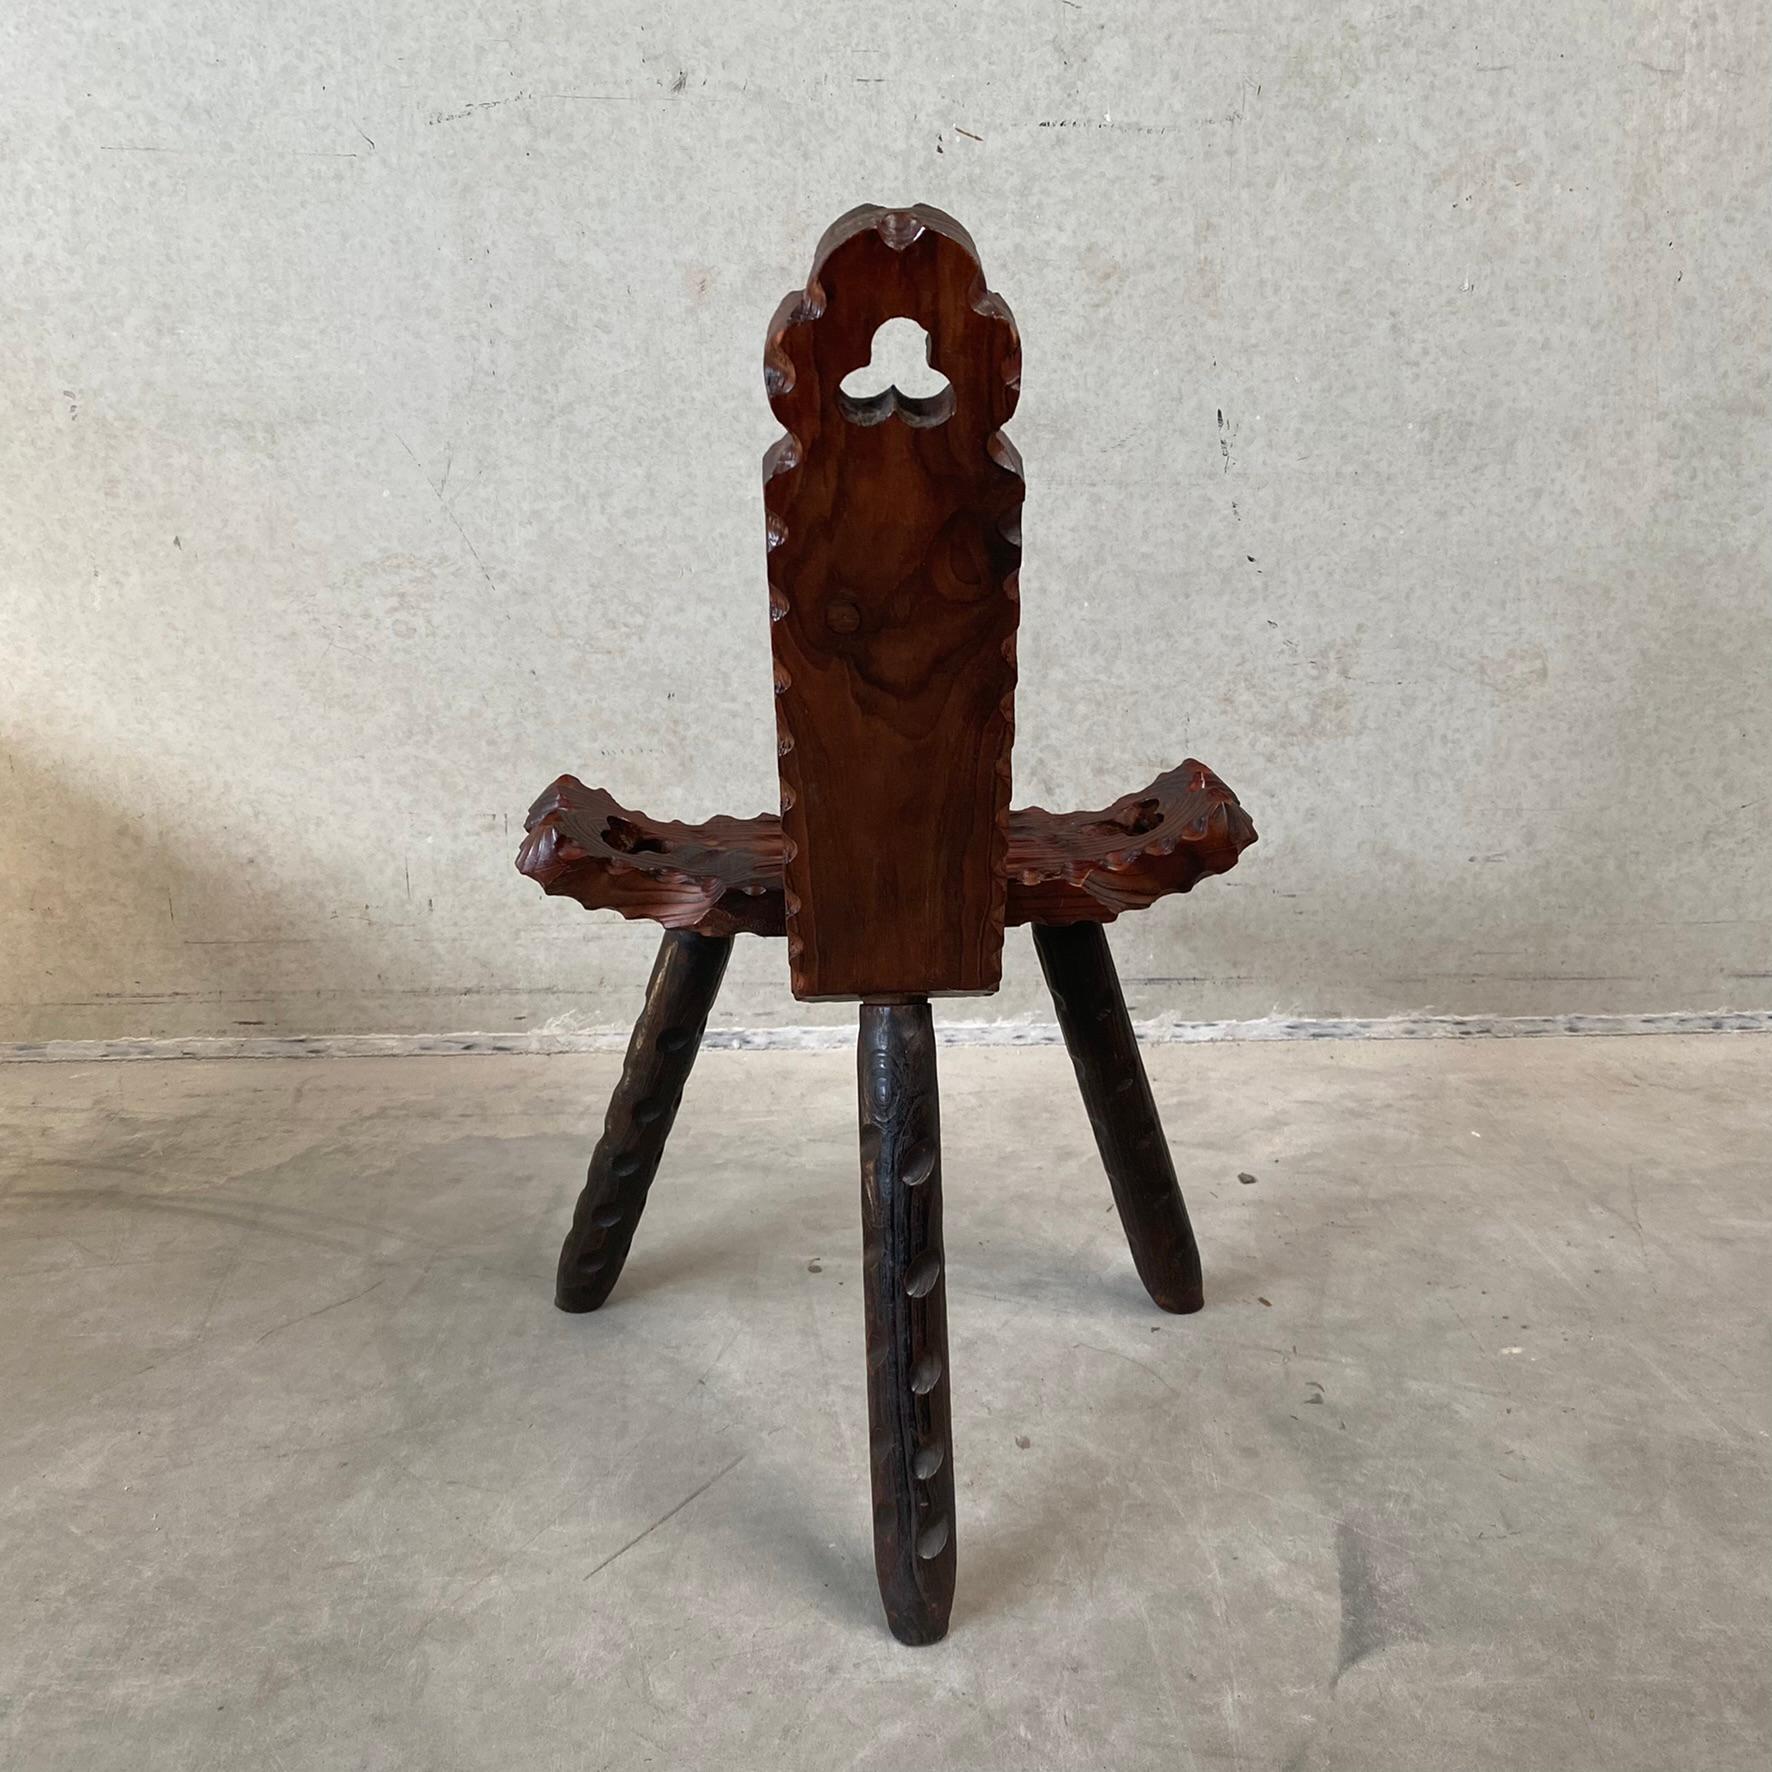 Hand-Carved Brutalist Spanish Midcentury Sculptural Tripod Chair 1950 For Sale